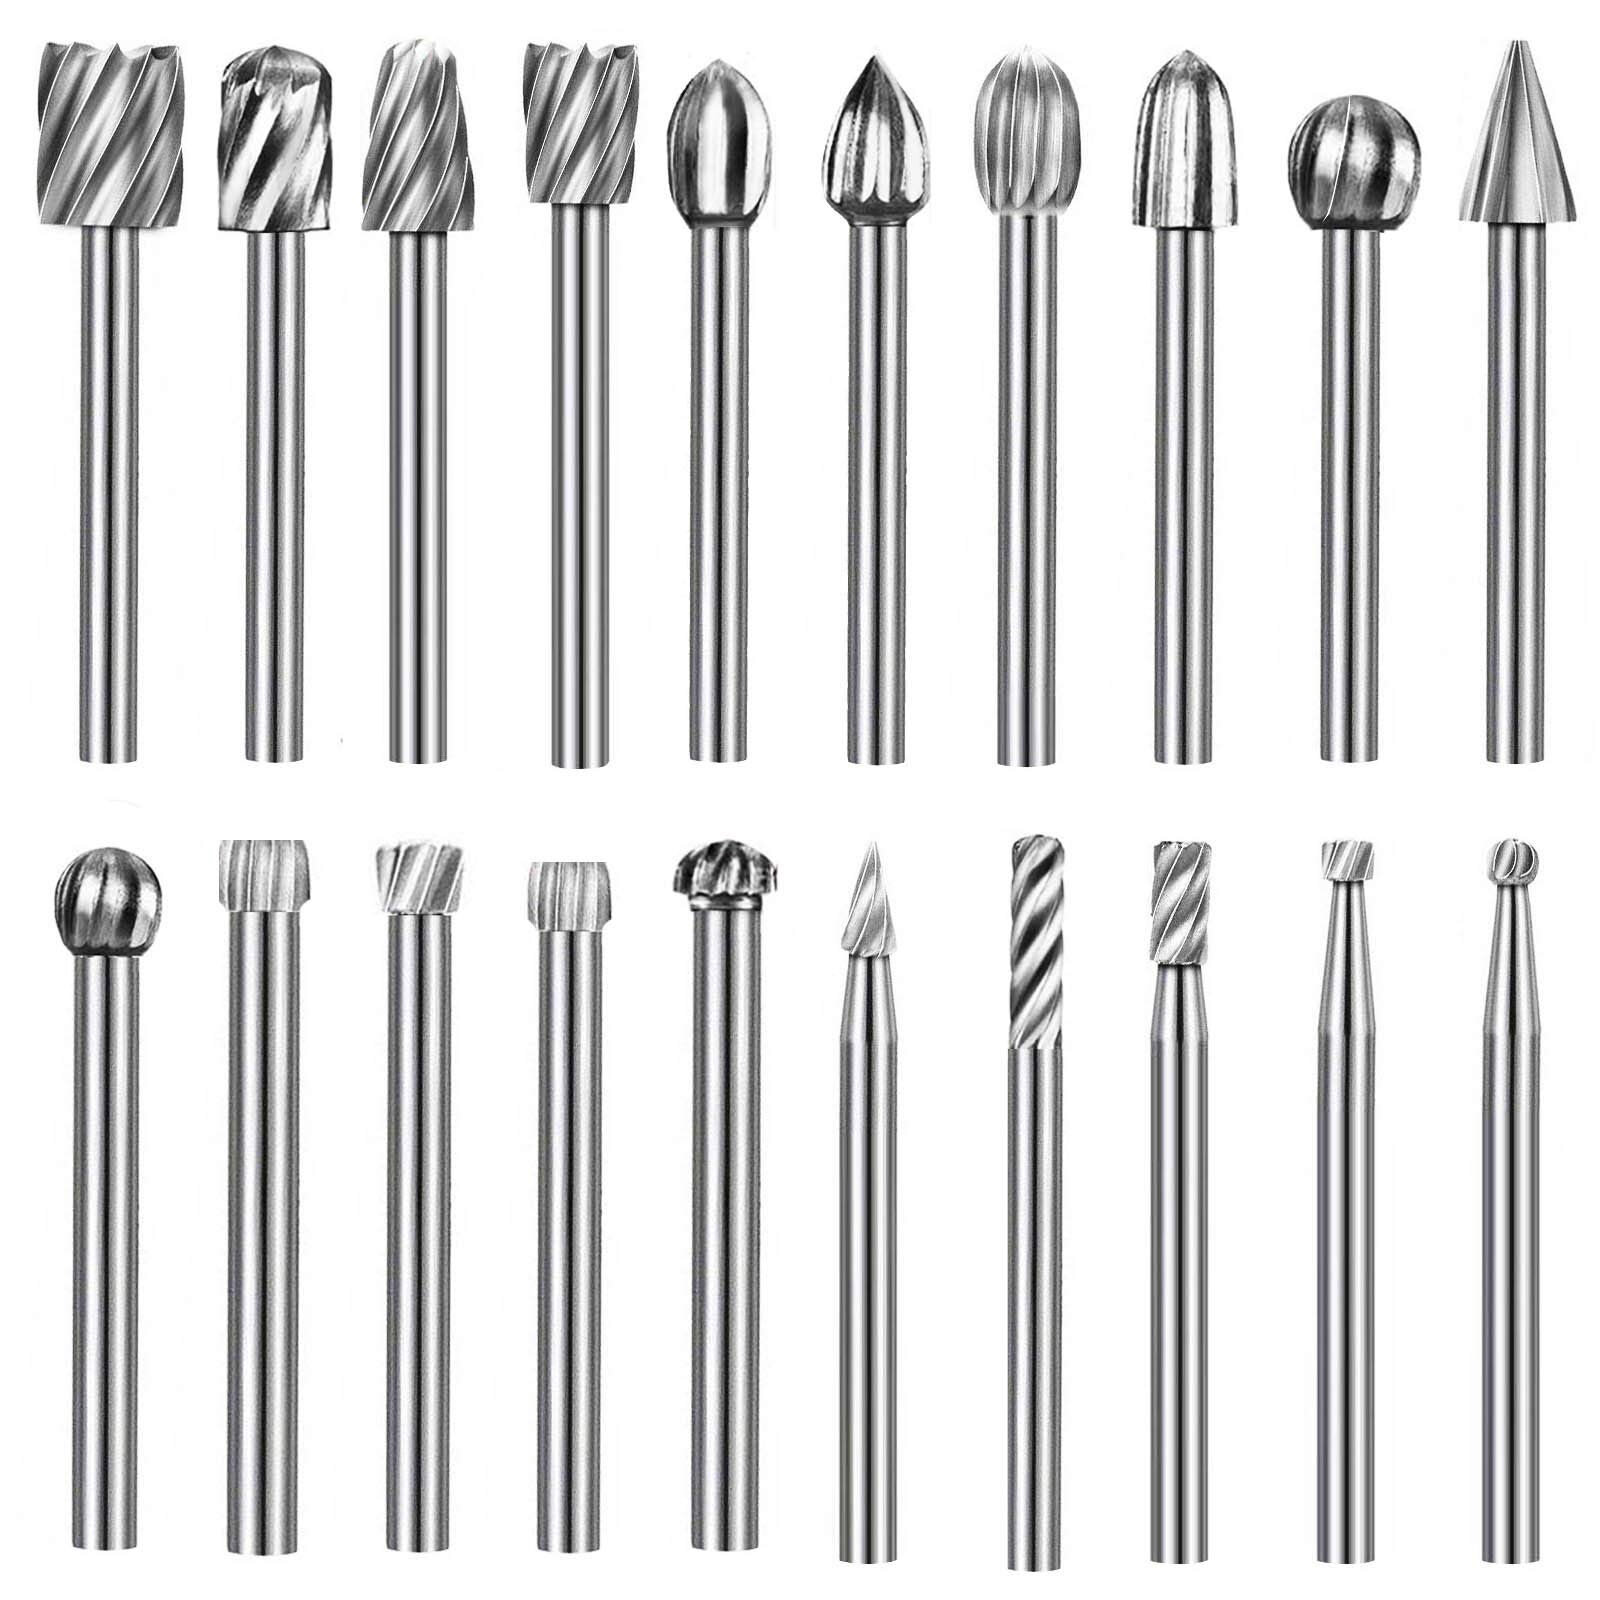 Drill Bits 6pcs 6mm 1/4 Inch Shank High Speed Steel Rotary File Burrs Bit Grinder Head Carving Tool Set 